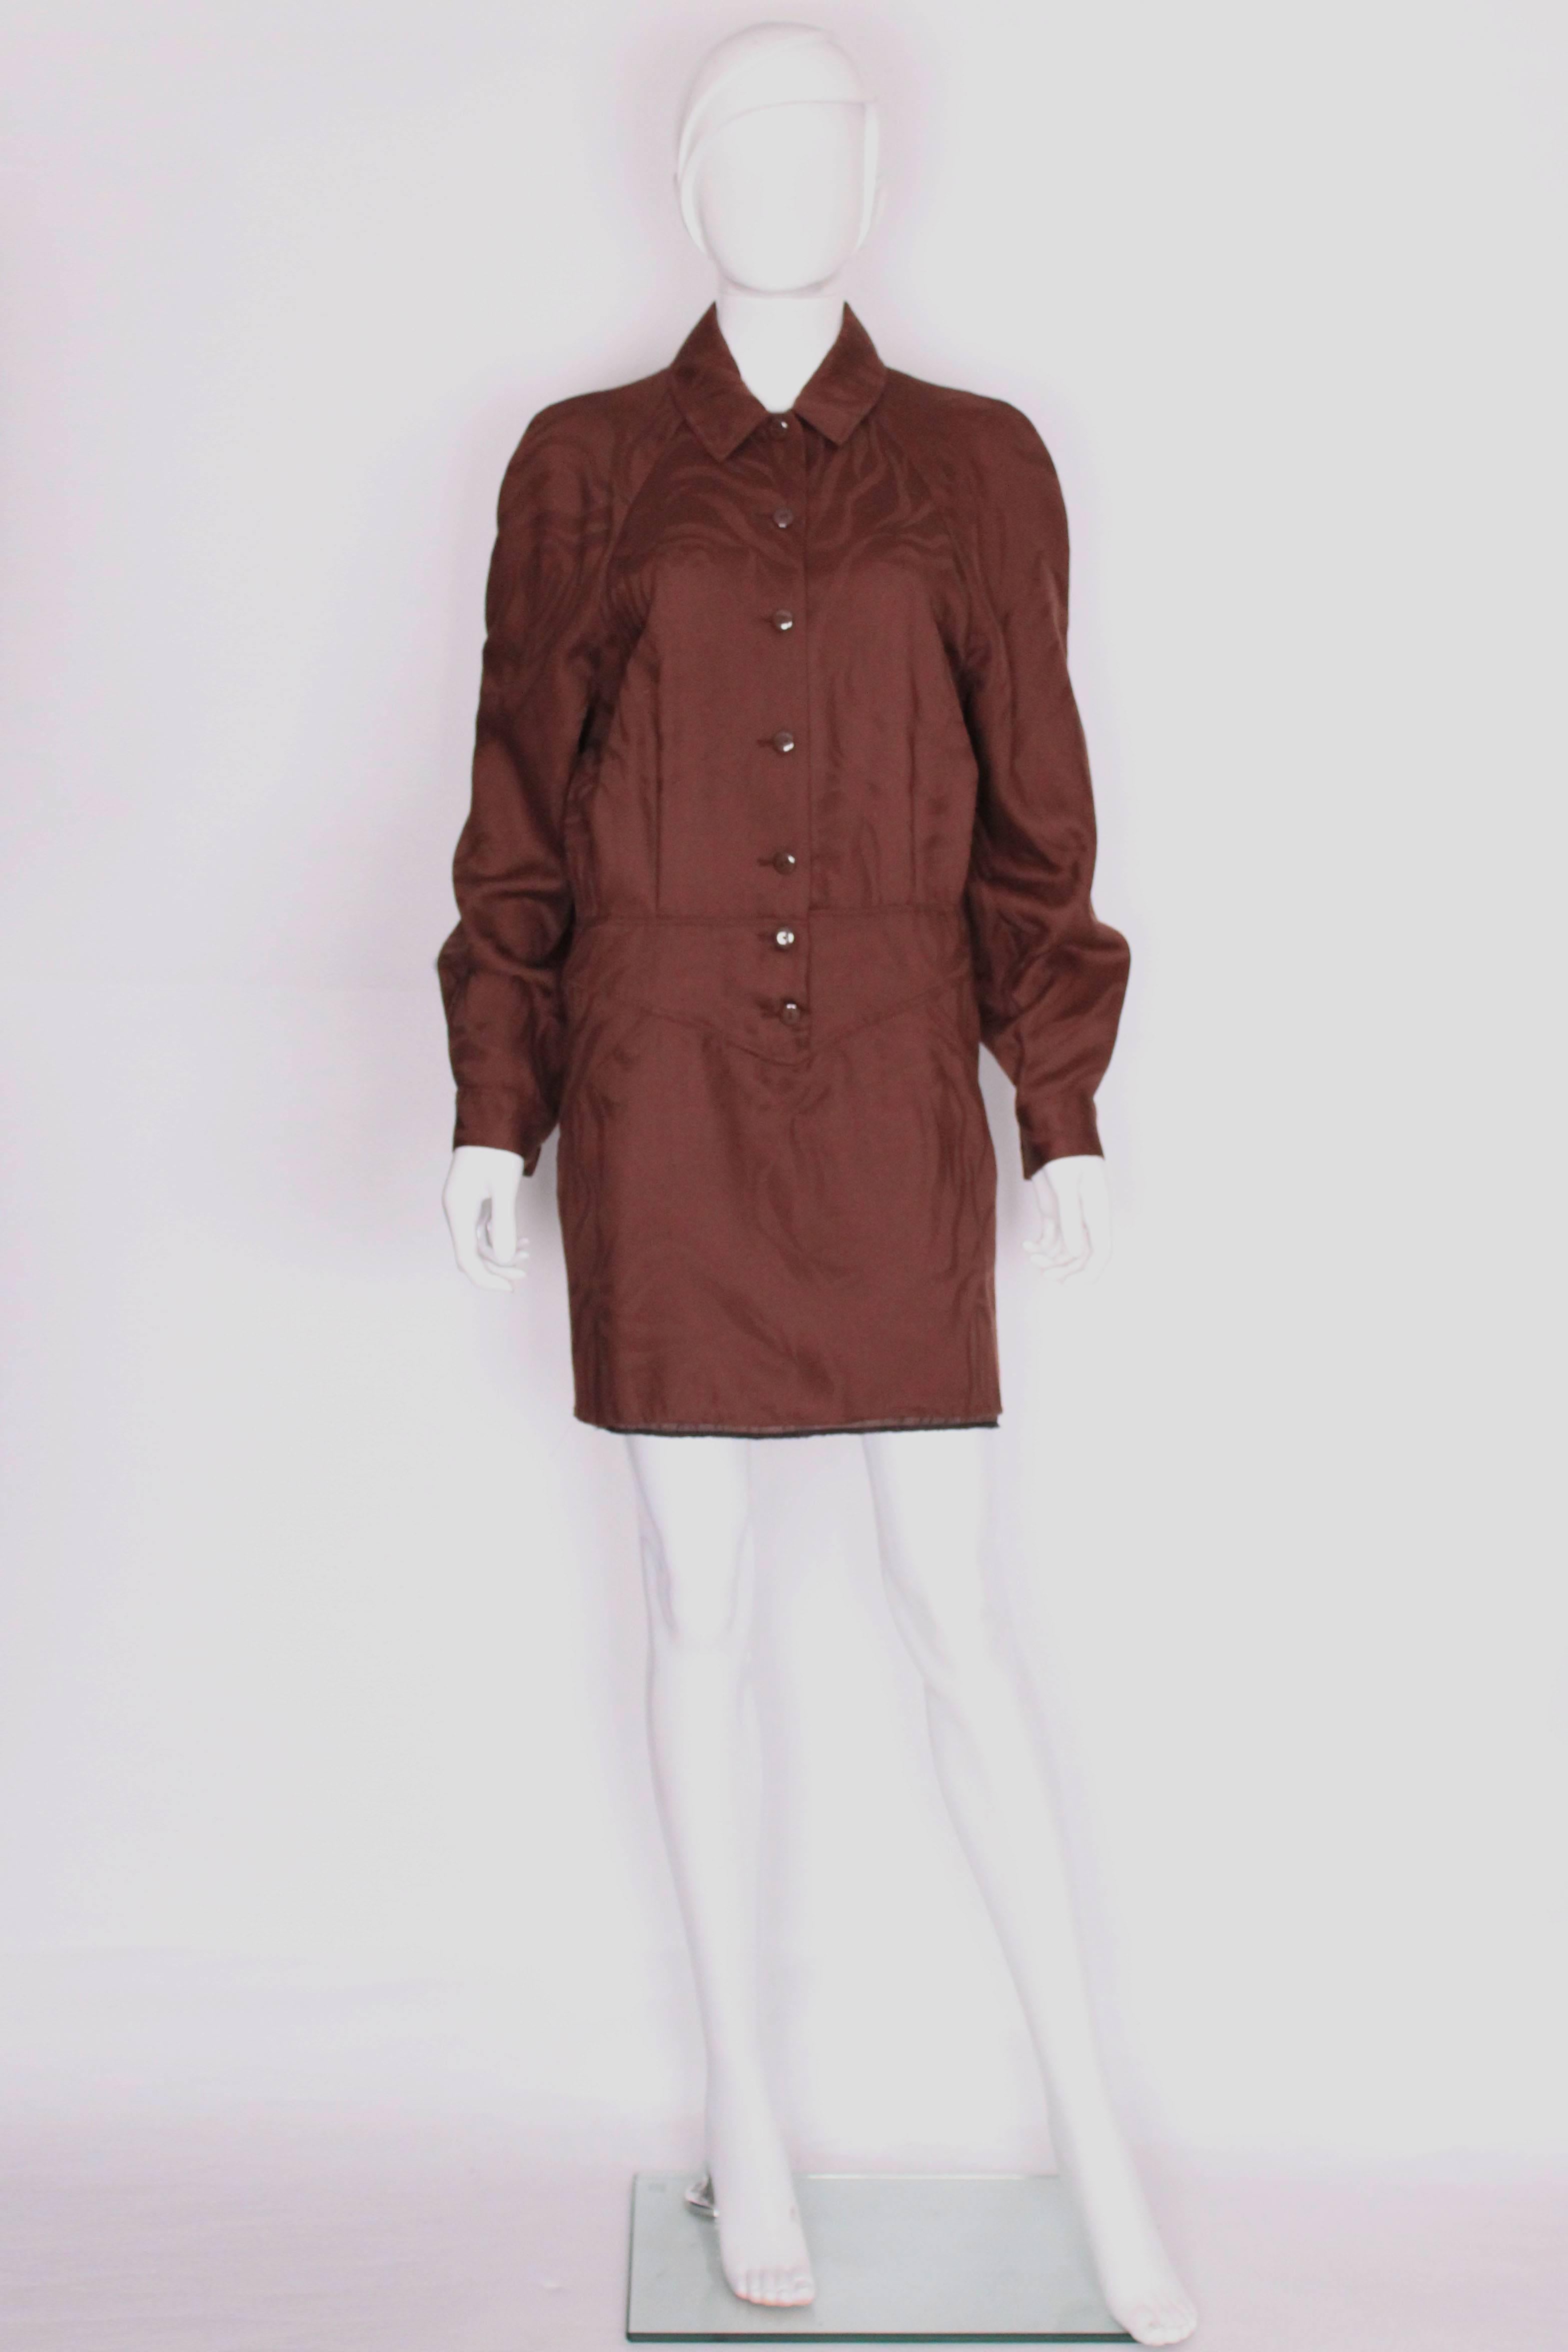 This shirt dress by Lanvin, Paris is in a brown wool printed fabric. It has a shirt collar, with a band detail at the waist. It has a 7 button front opening, button cuffs, 2 slant pockets at waist level, and pleat detail at the back.